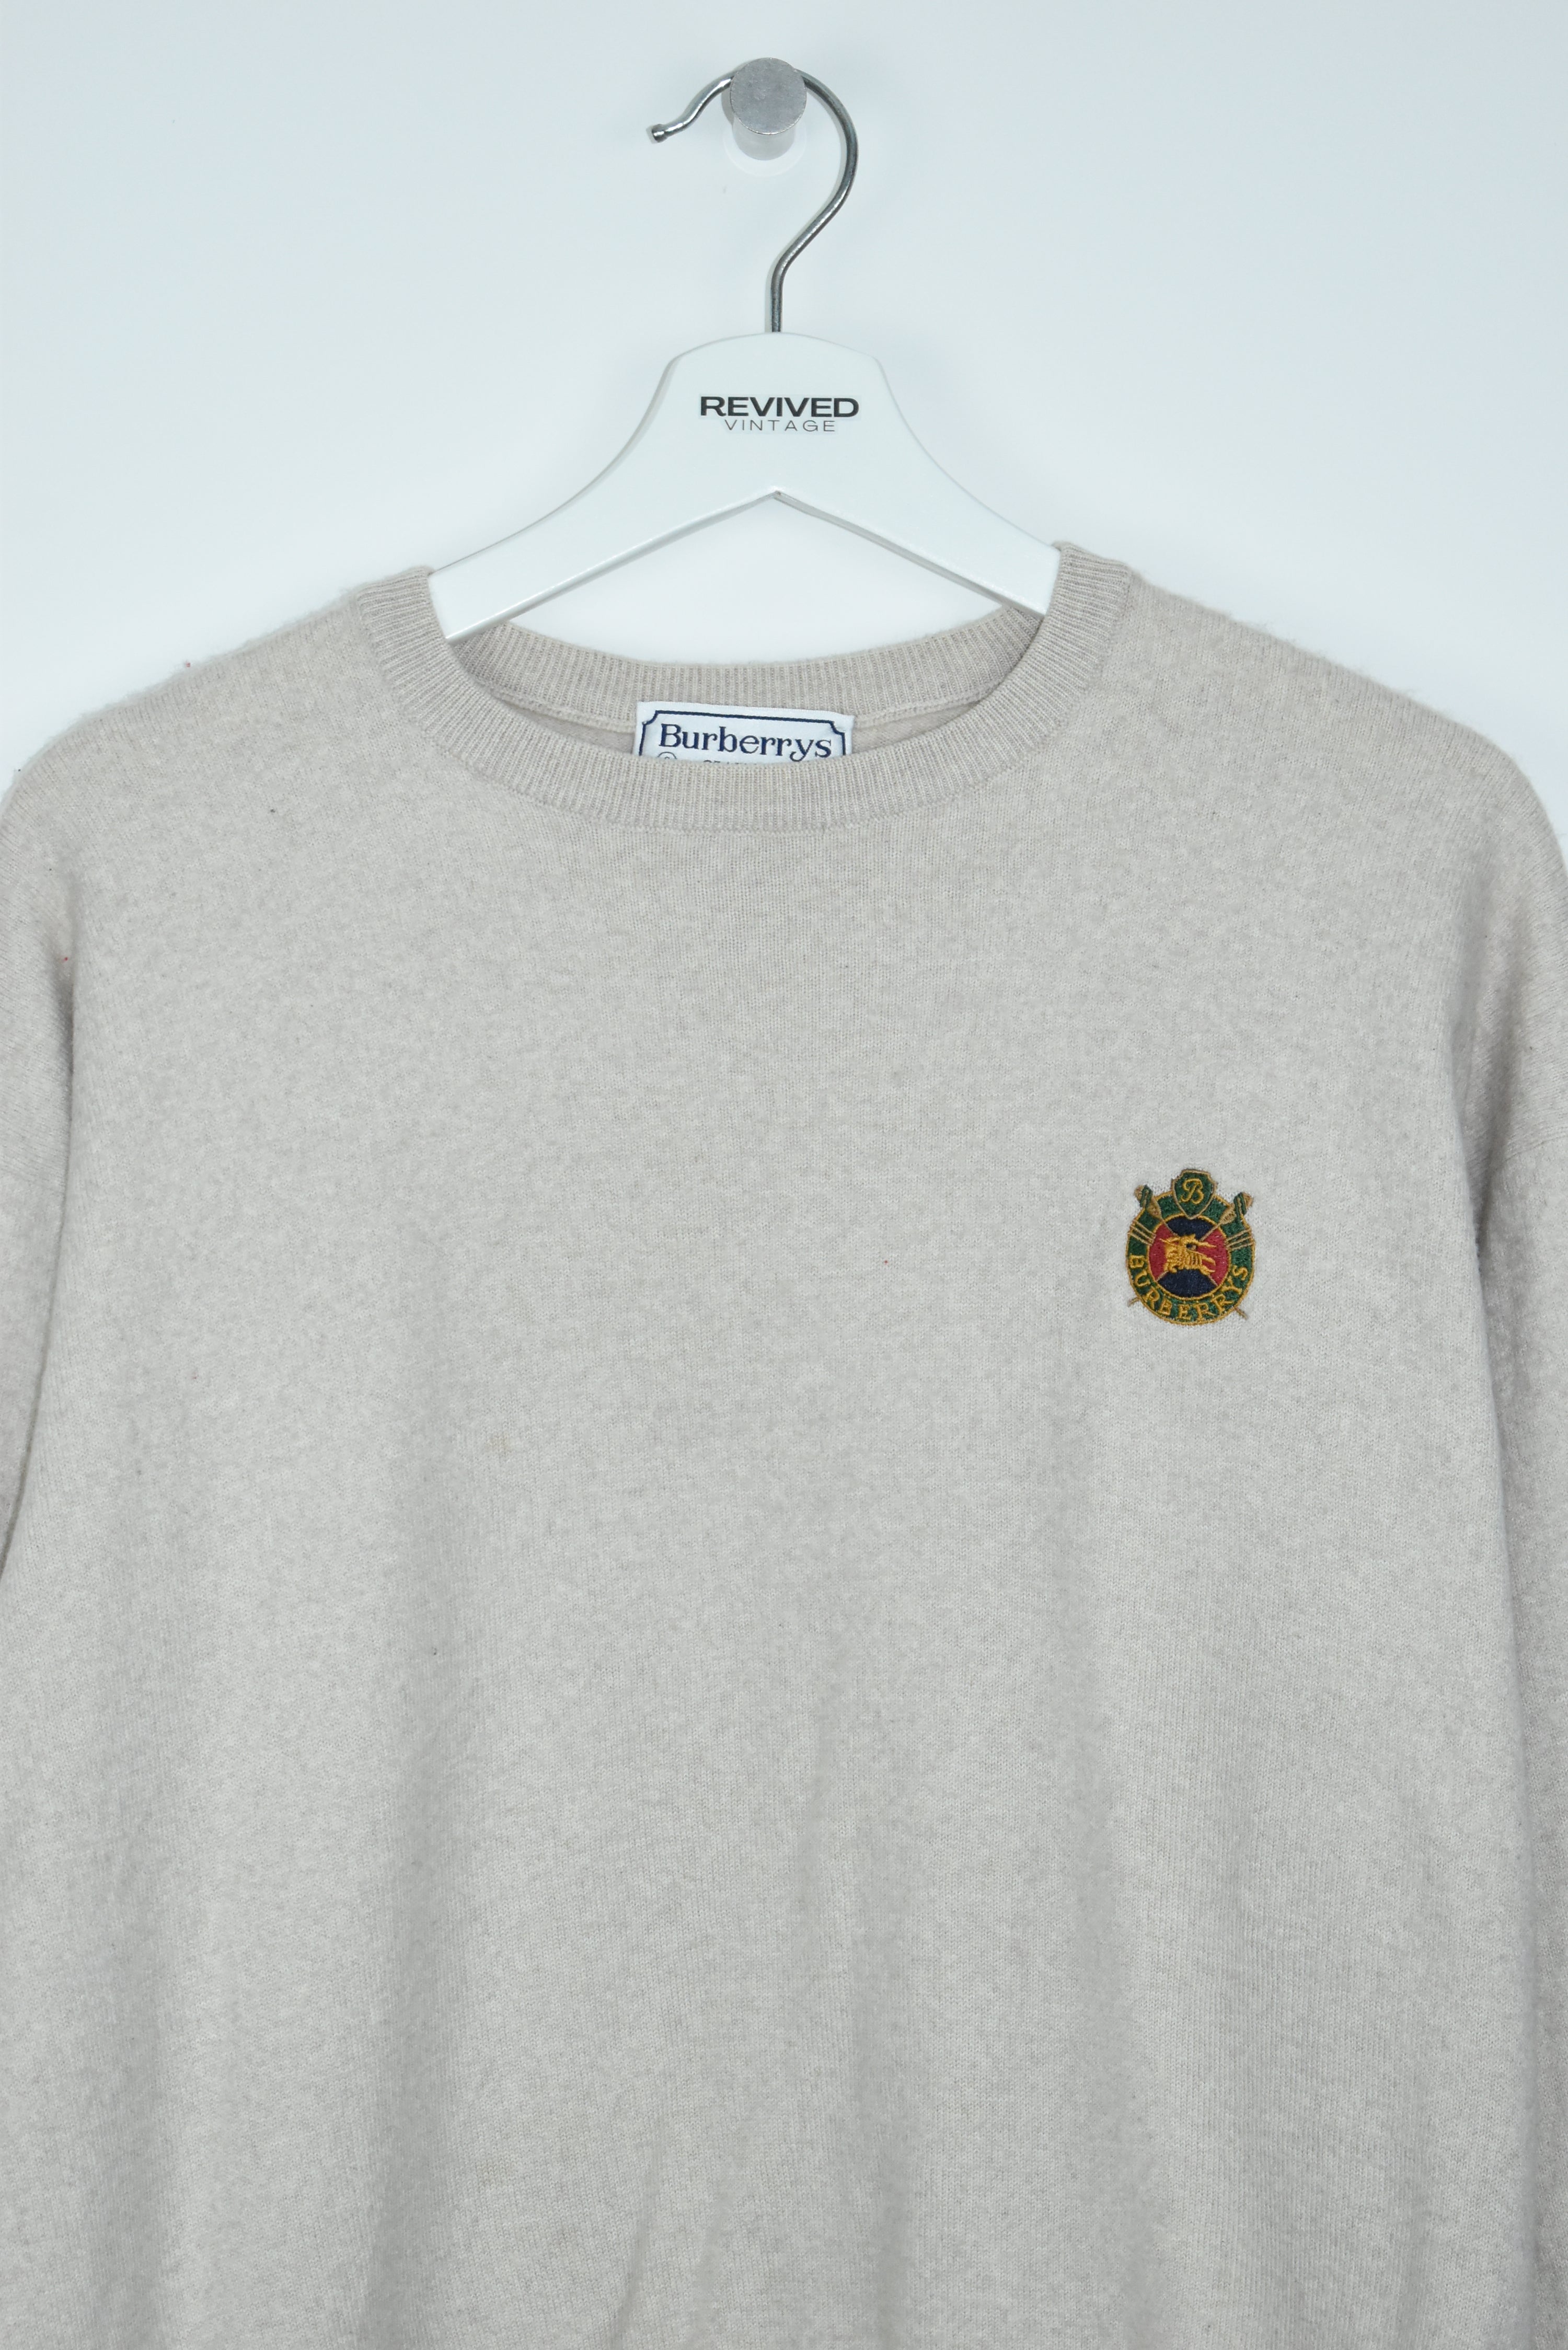 Vintage Burberry Embroidery Logo Knit Sweater Small